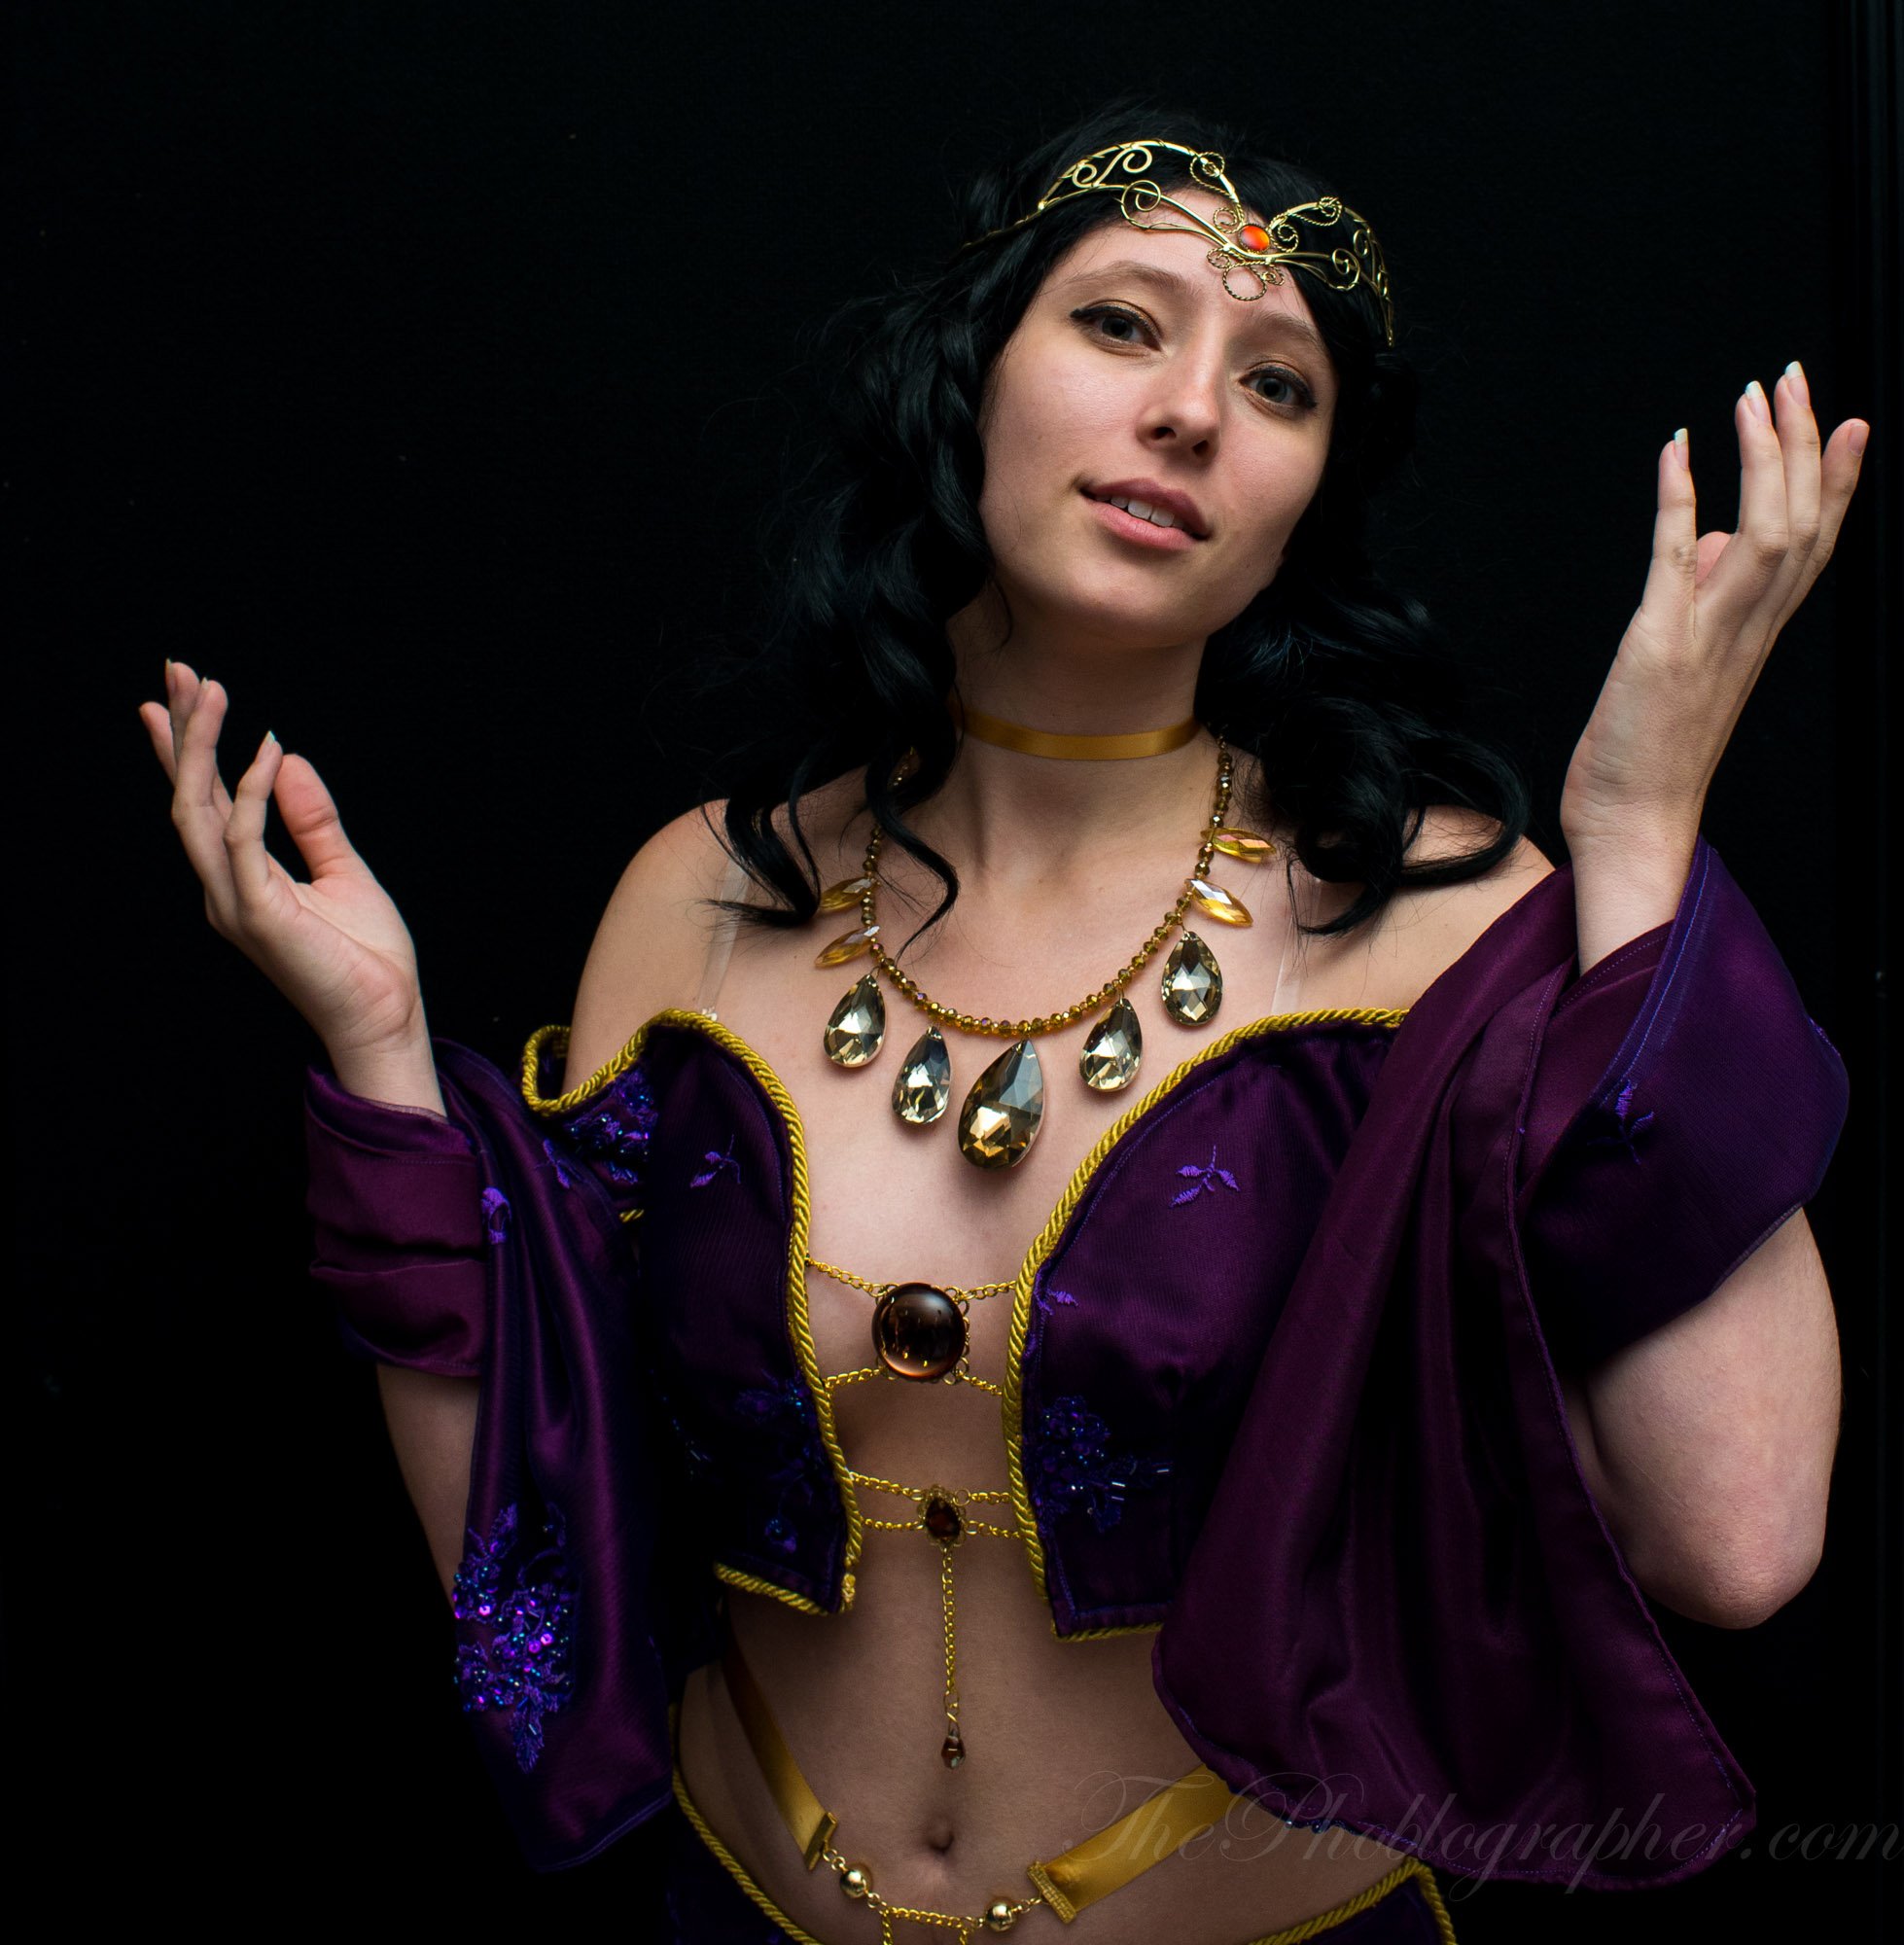 Cosplay is not Consent: A Reminder to the Photography Community